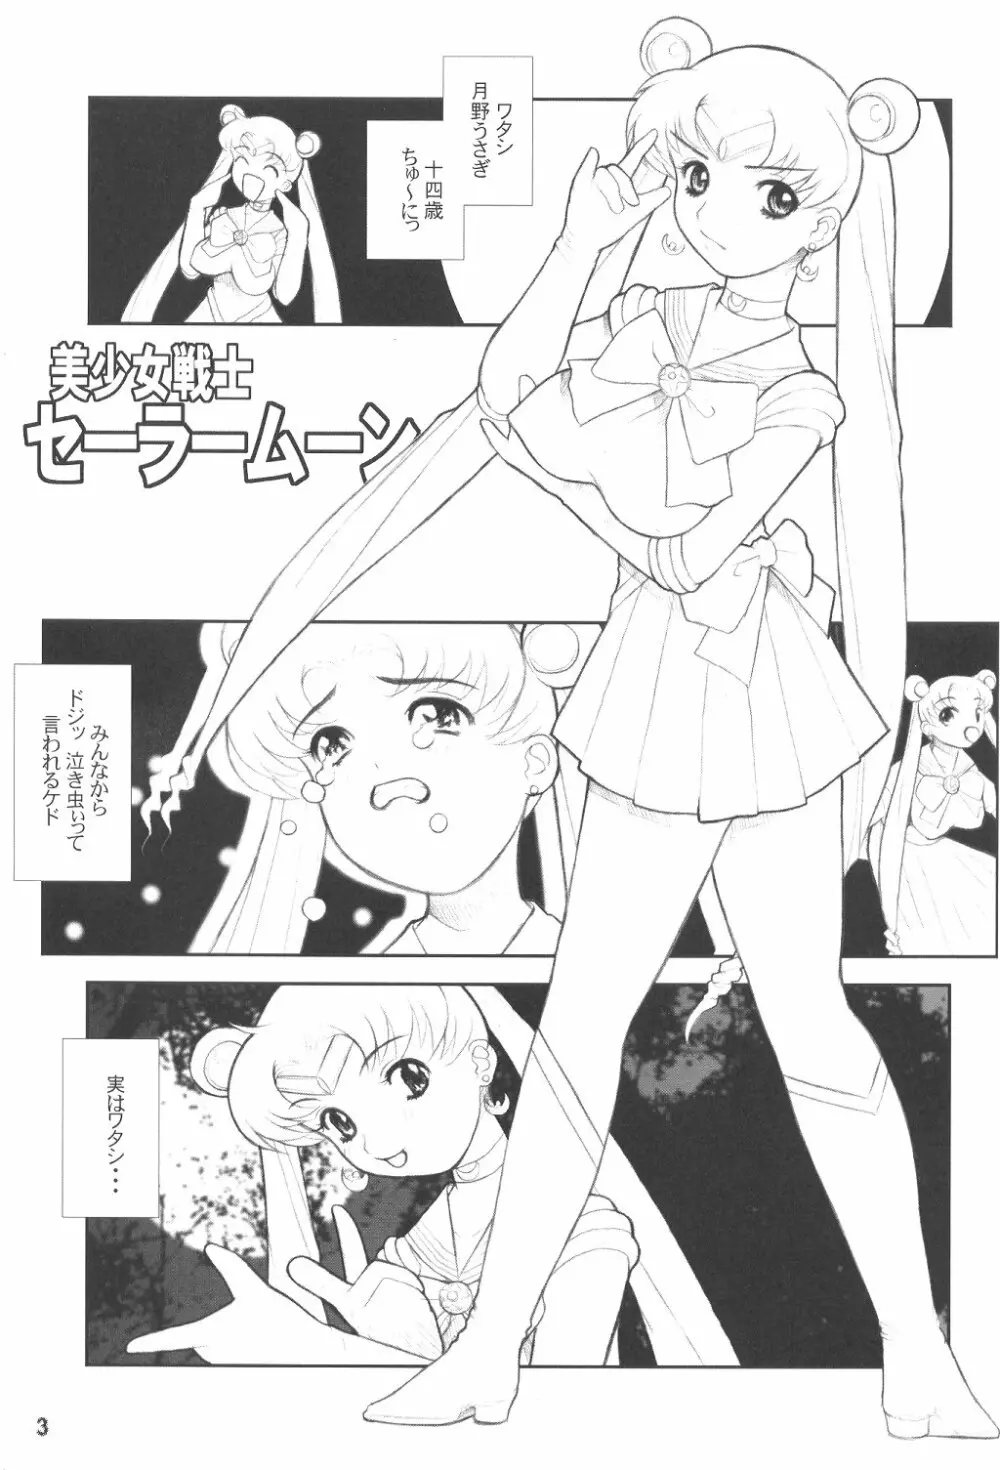 MaD ArtistS SailoR MooN Page.2